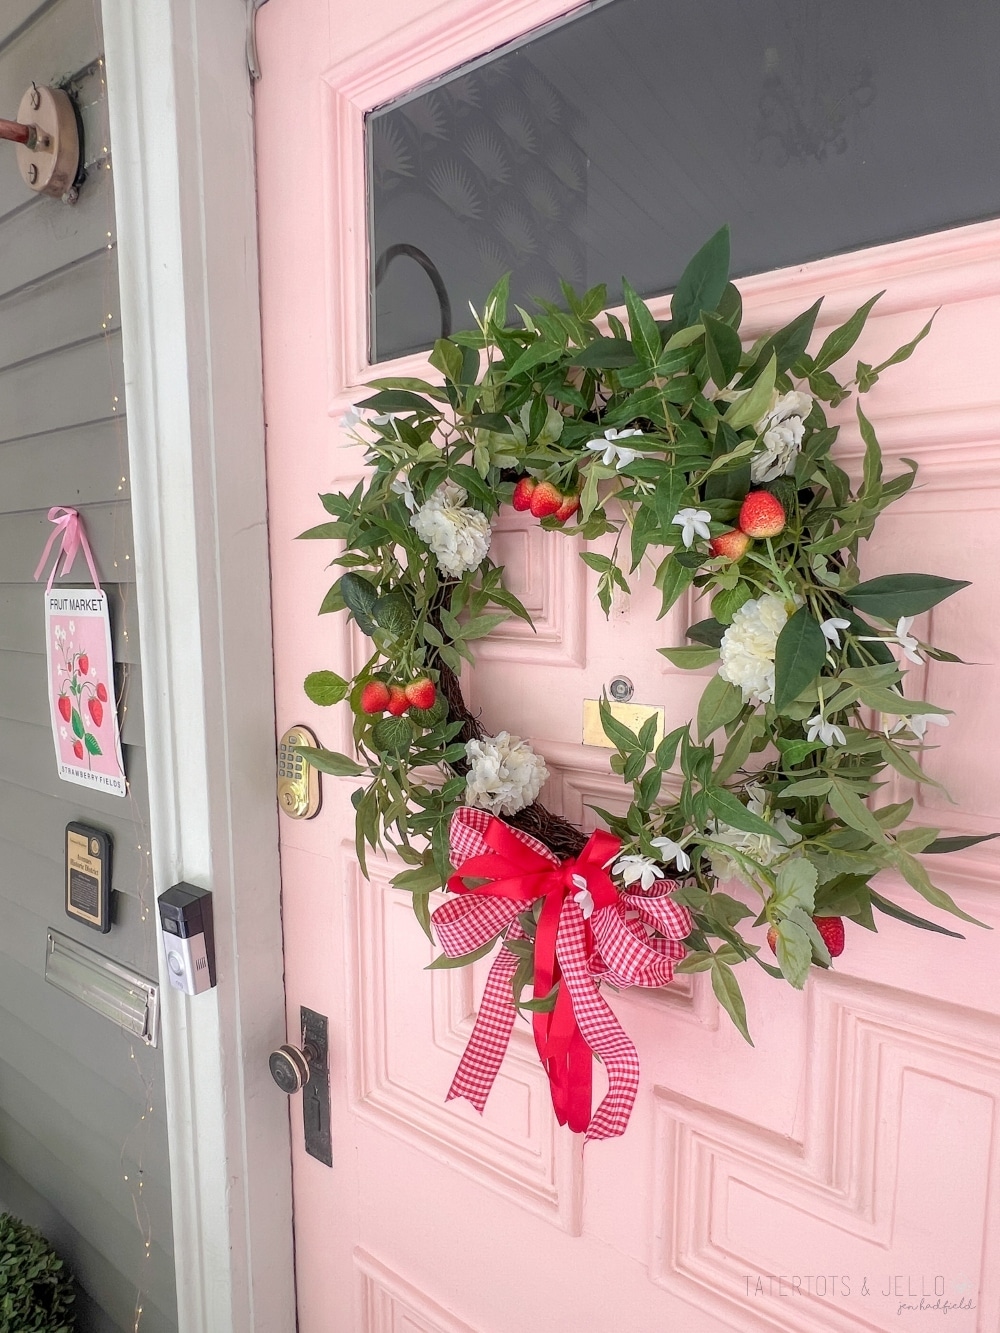 DIY Summer Strawberry Wreath. Create a charming summer strawberry-themed wreath by combining faux strawberries and flowers, lush greenery, and a red bow for a delightful way to decorate your front door.